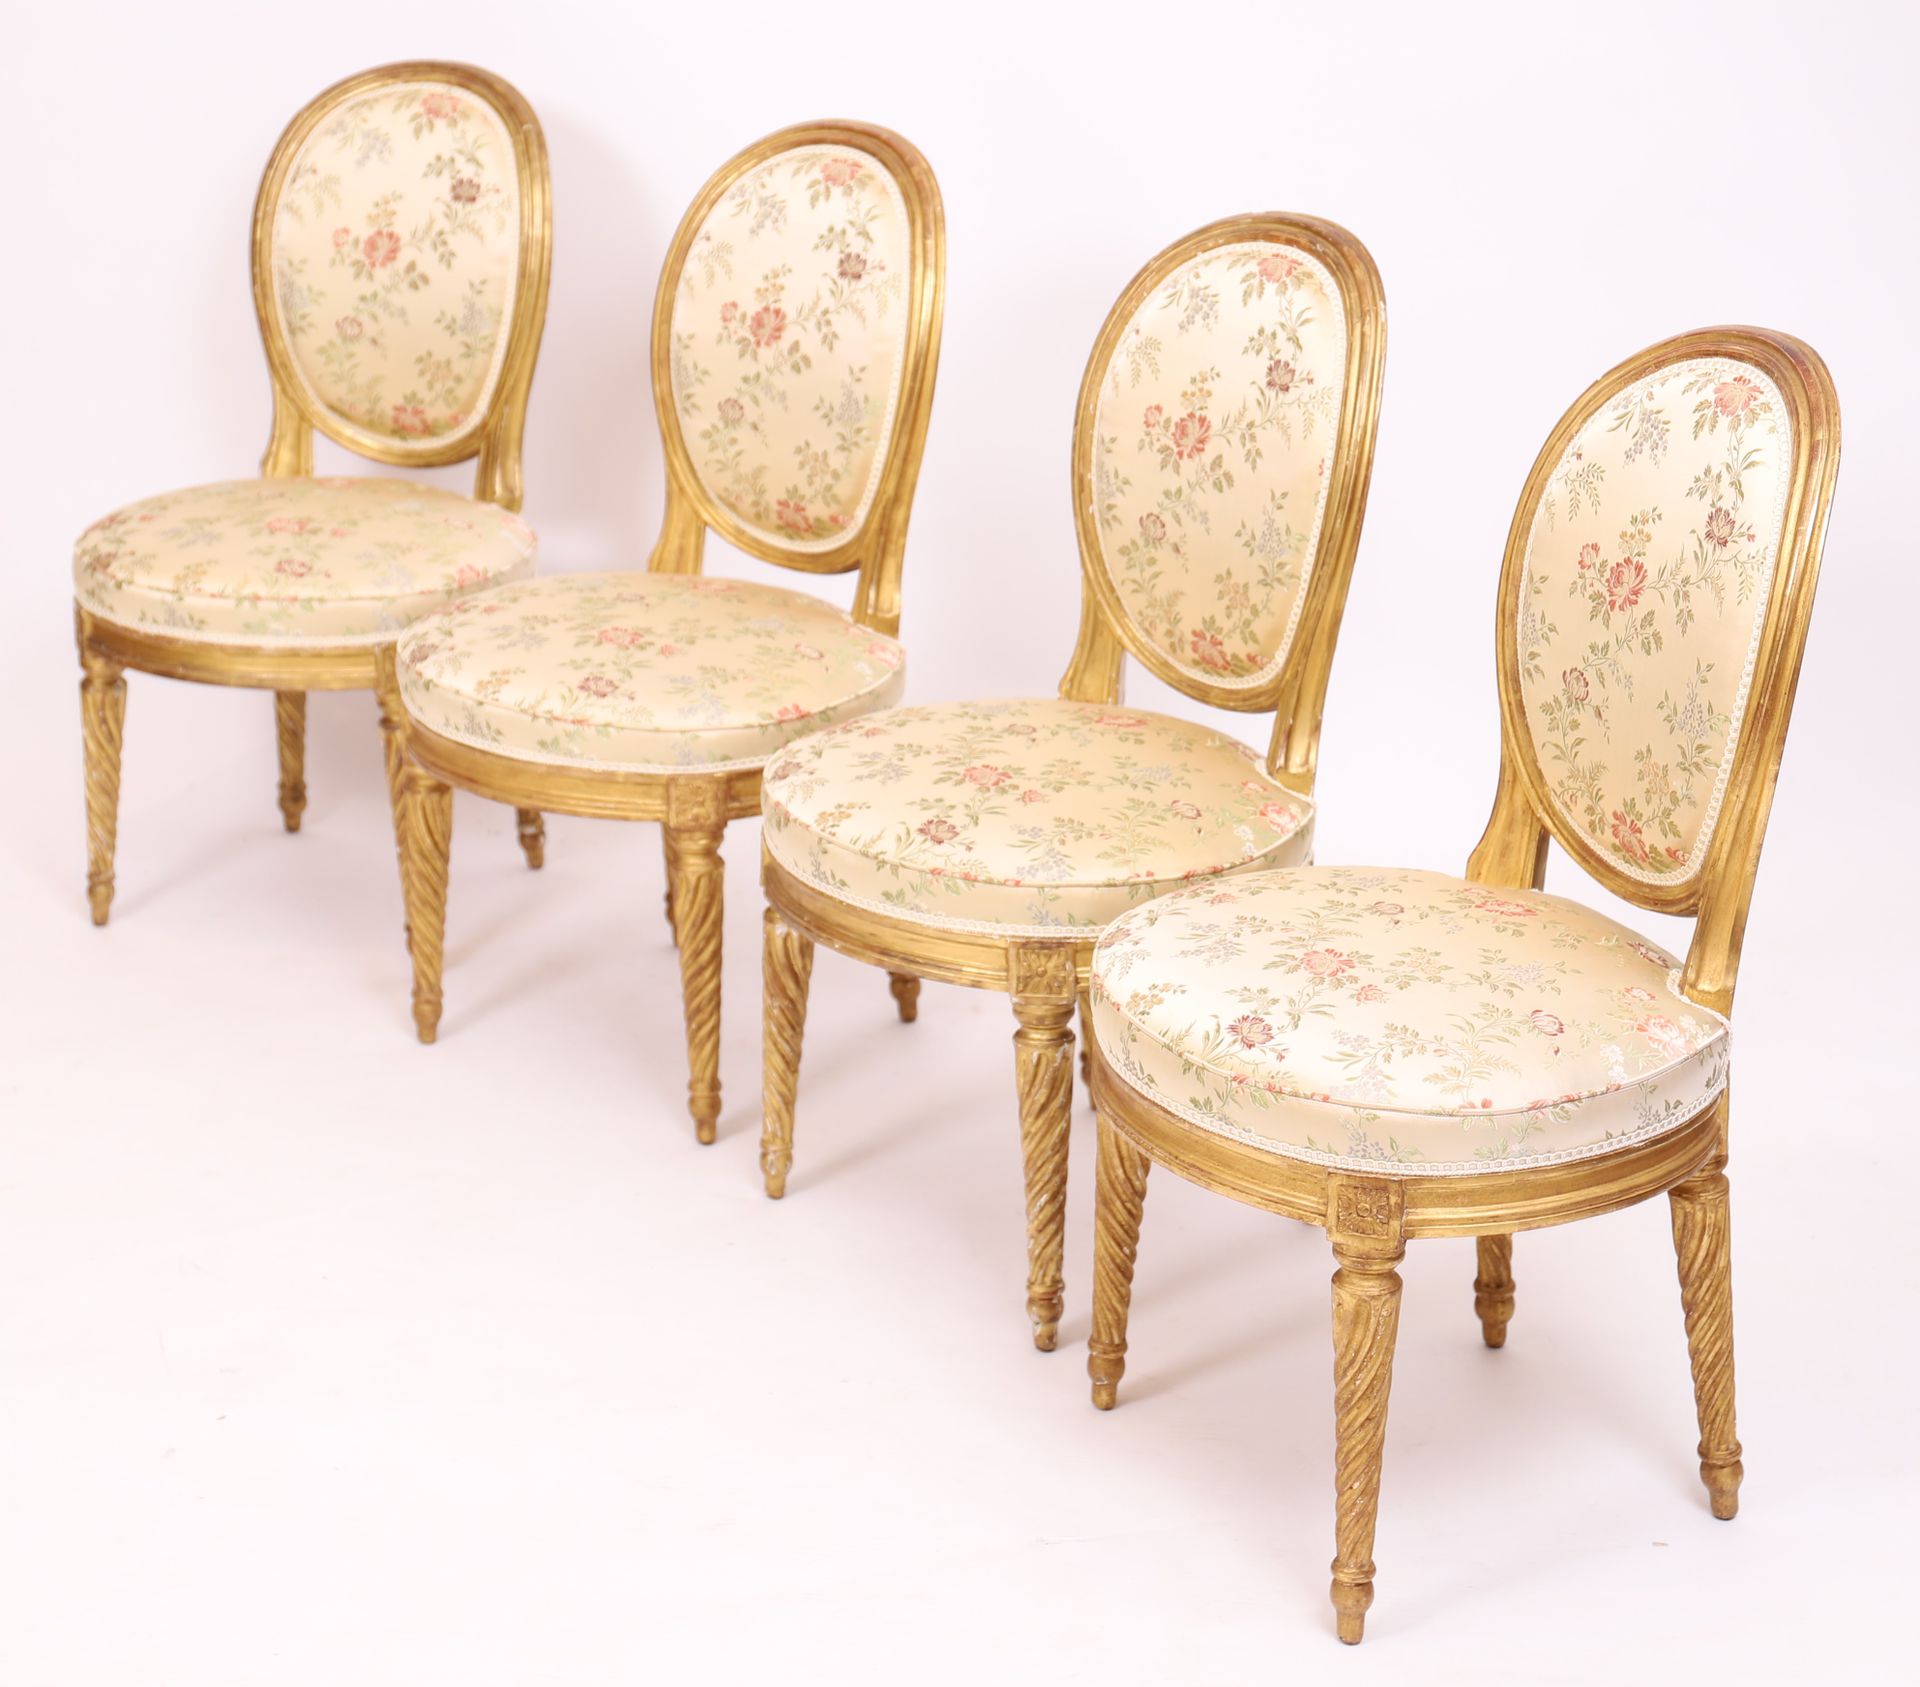 Null SUITE OF FOUR LOUIS XVI CHAIRS

In gilded wood, with medallion back in cabr&hellip;